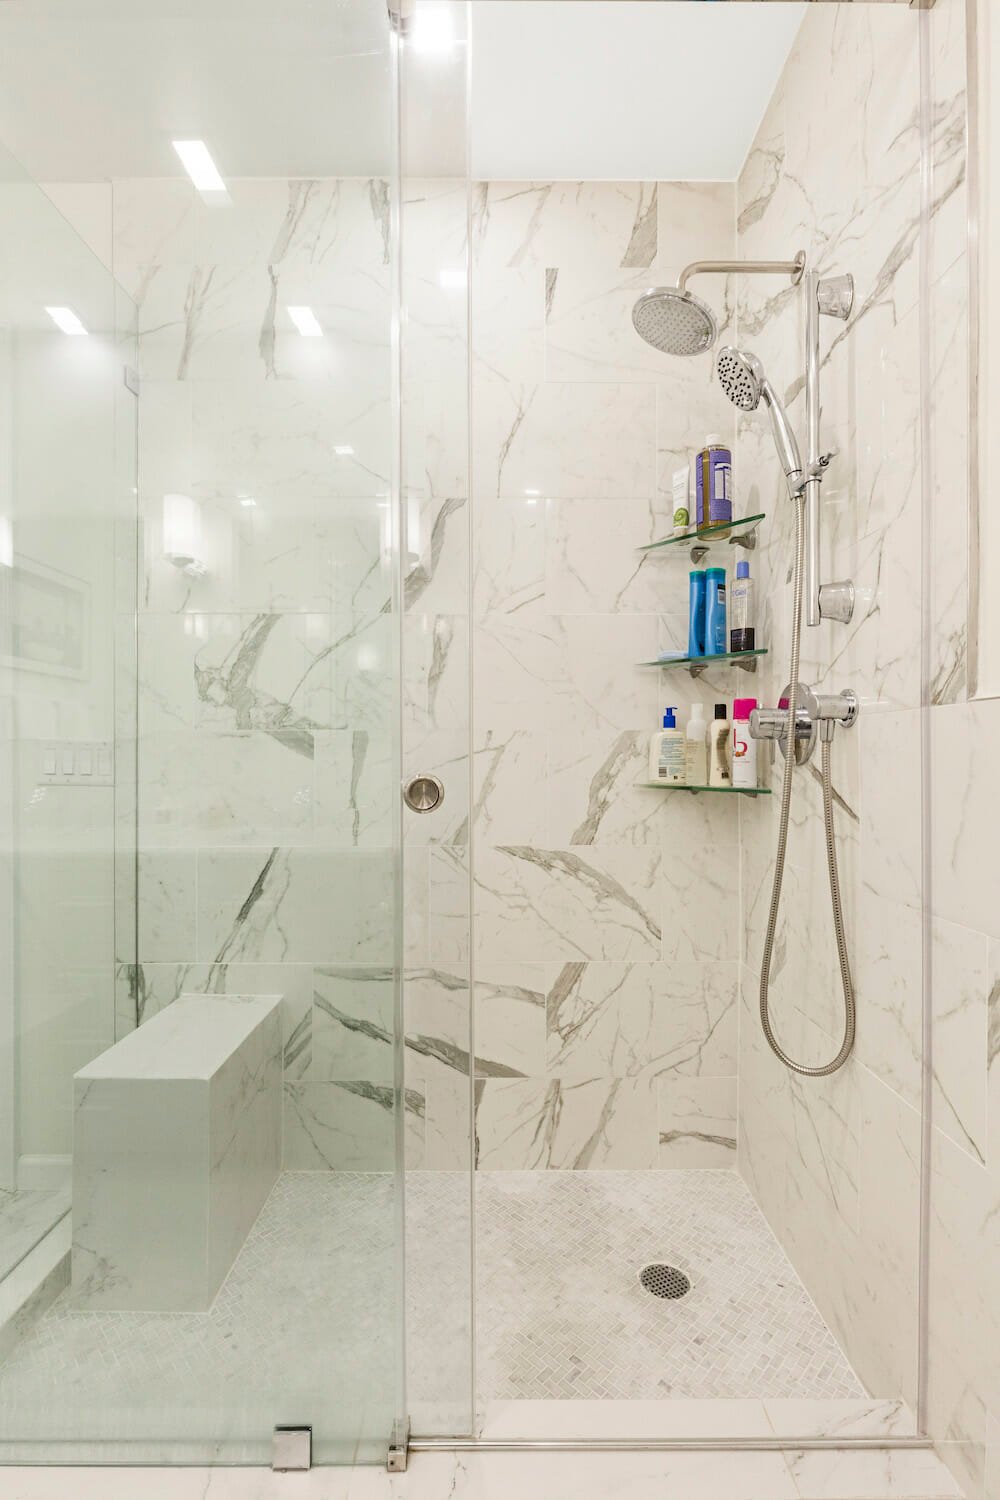 frameless glass sliding doors to a walk in shower with steel bathroom fittings and open shelves after renovation